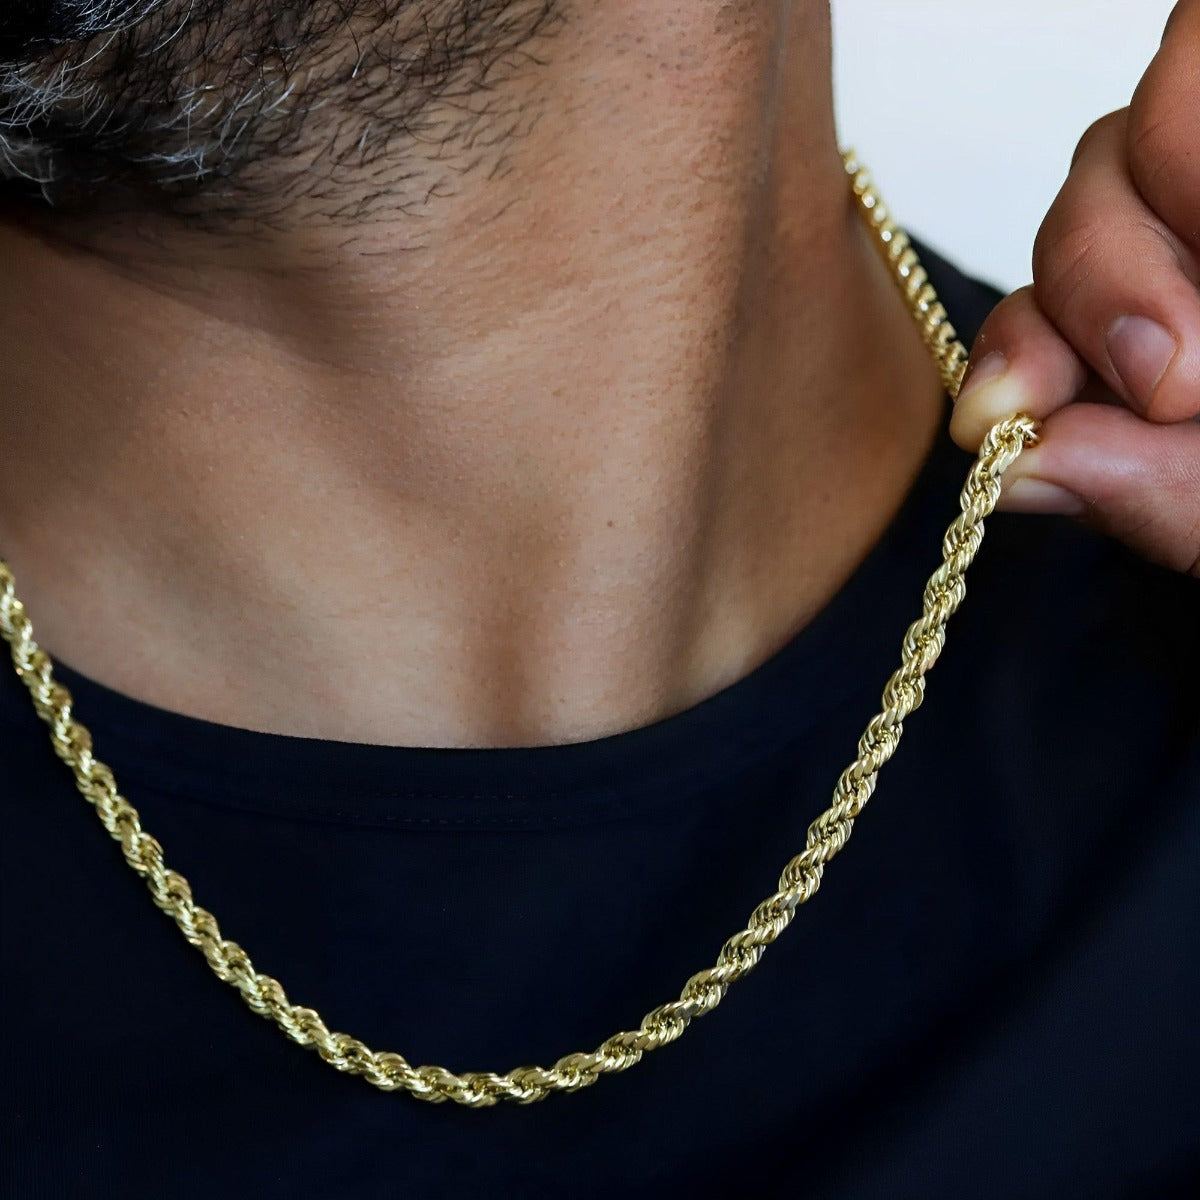 Buy 22K Yellow Gold 3.3mm Rope Chain Necklace 20 Inches 9.10 Grams (Del. in  10-12 Days) at ShopLC.